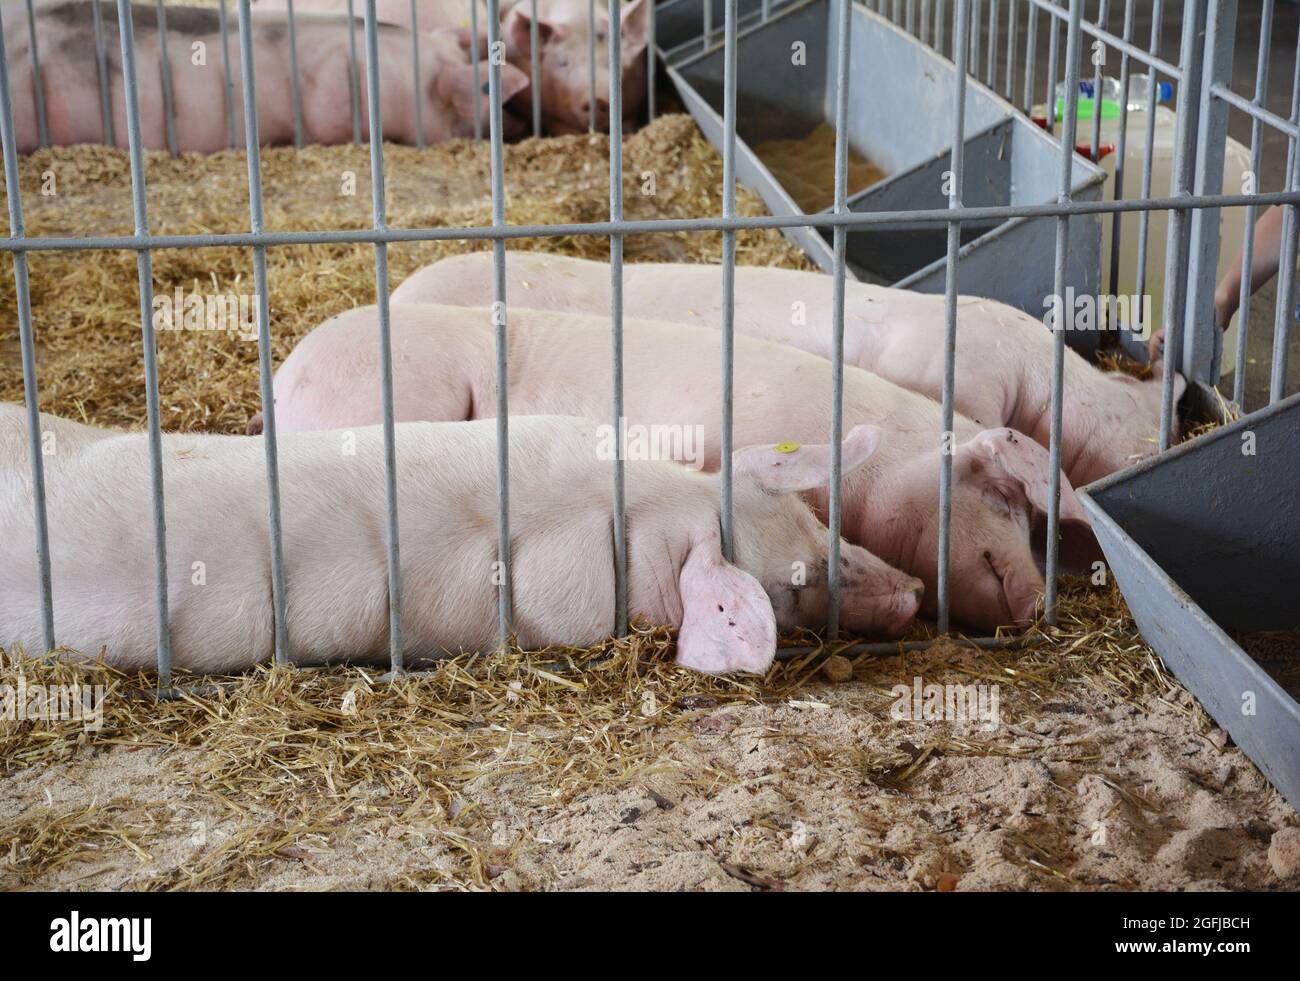 Raising landrace breed of swine on a farm for pork production: three white docile pigs, hogs with droopy ears and long body sleeping on straw after fe Stock Photo